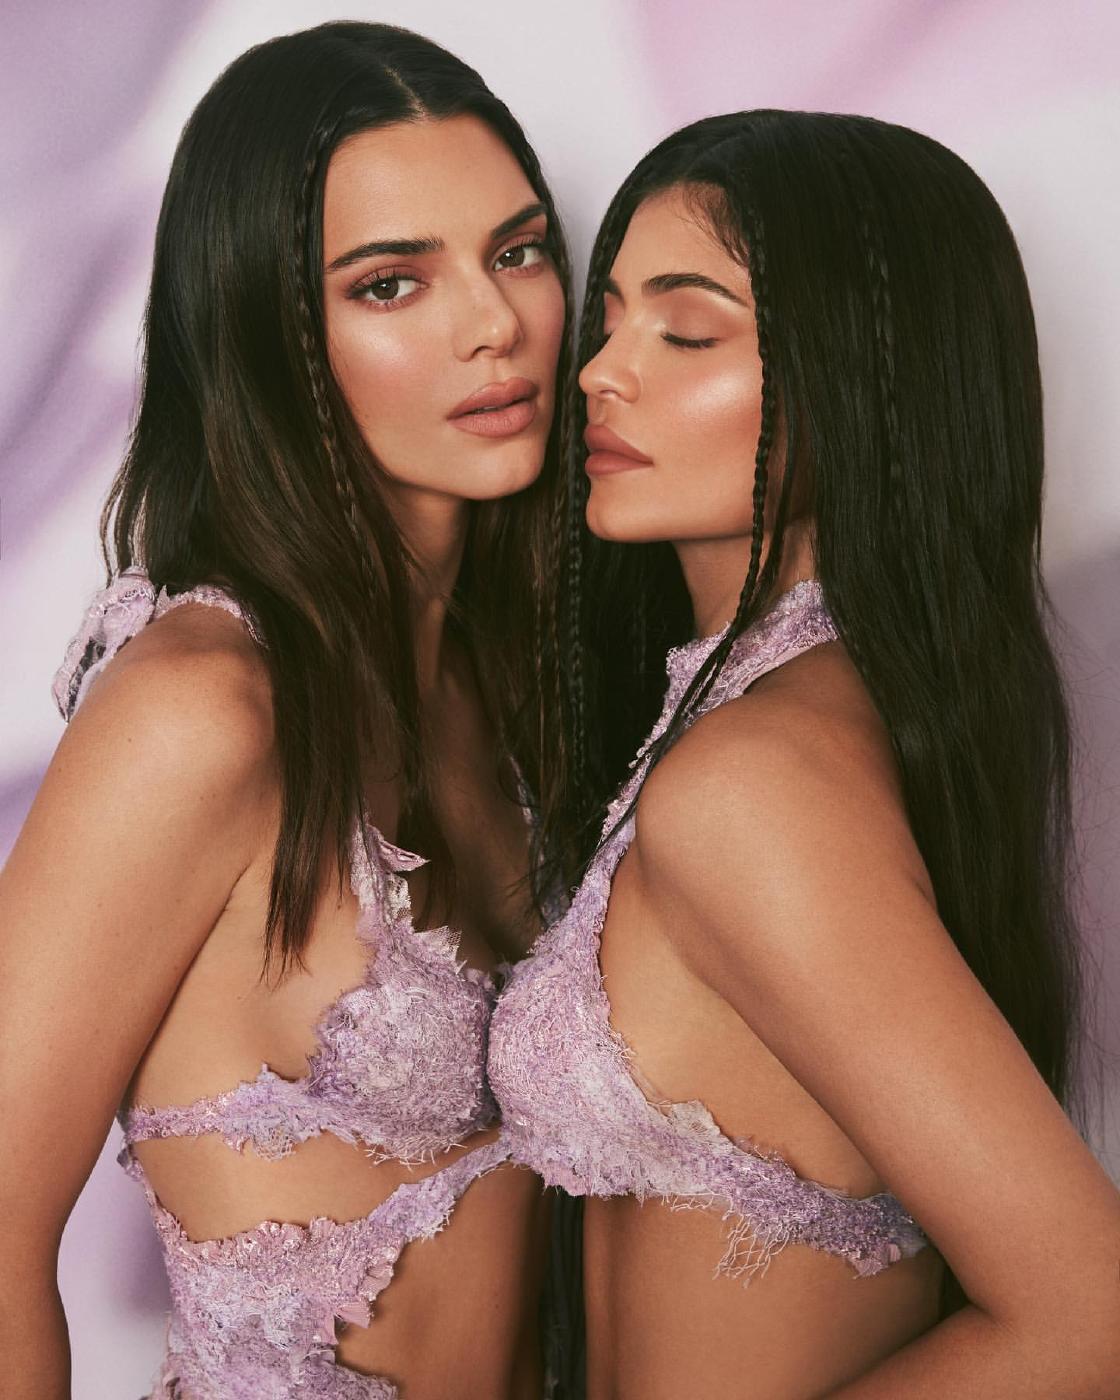 Kendall And Kylie Jenner Modeling Photoshoot Set Leaked Cpivbo